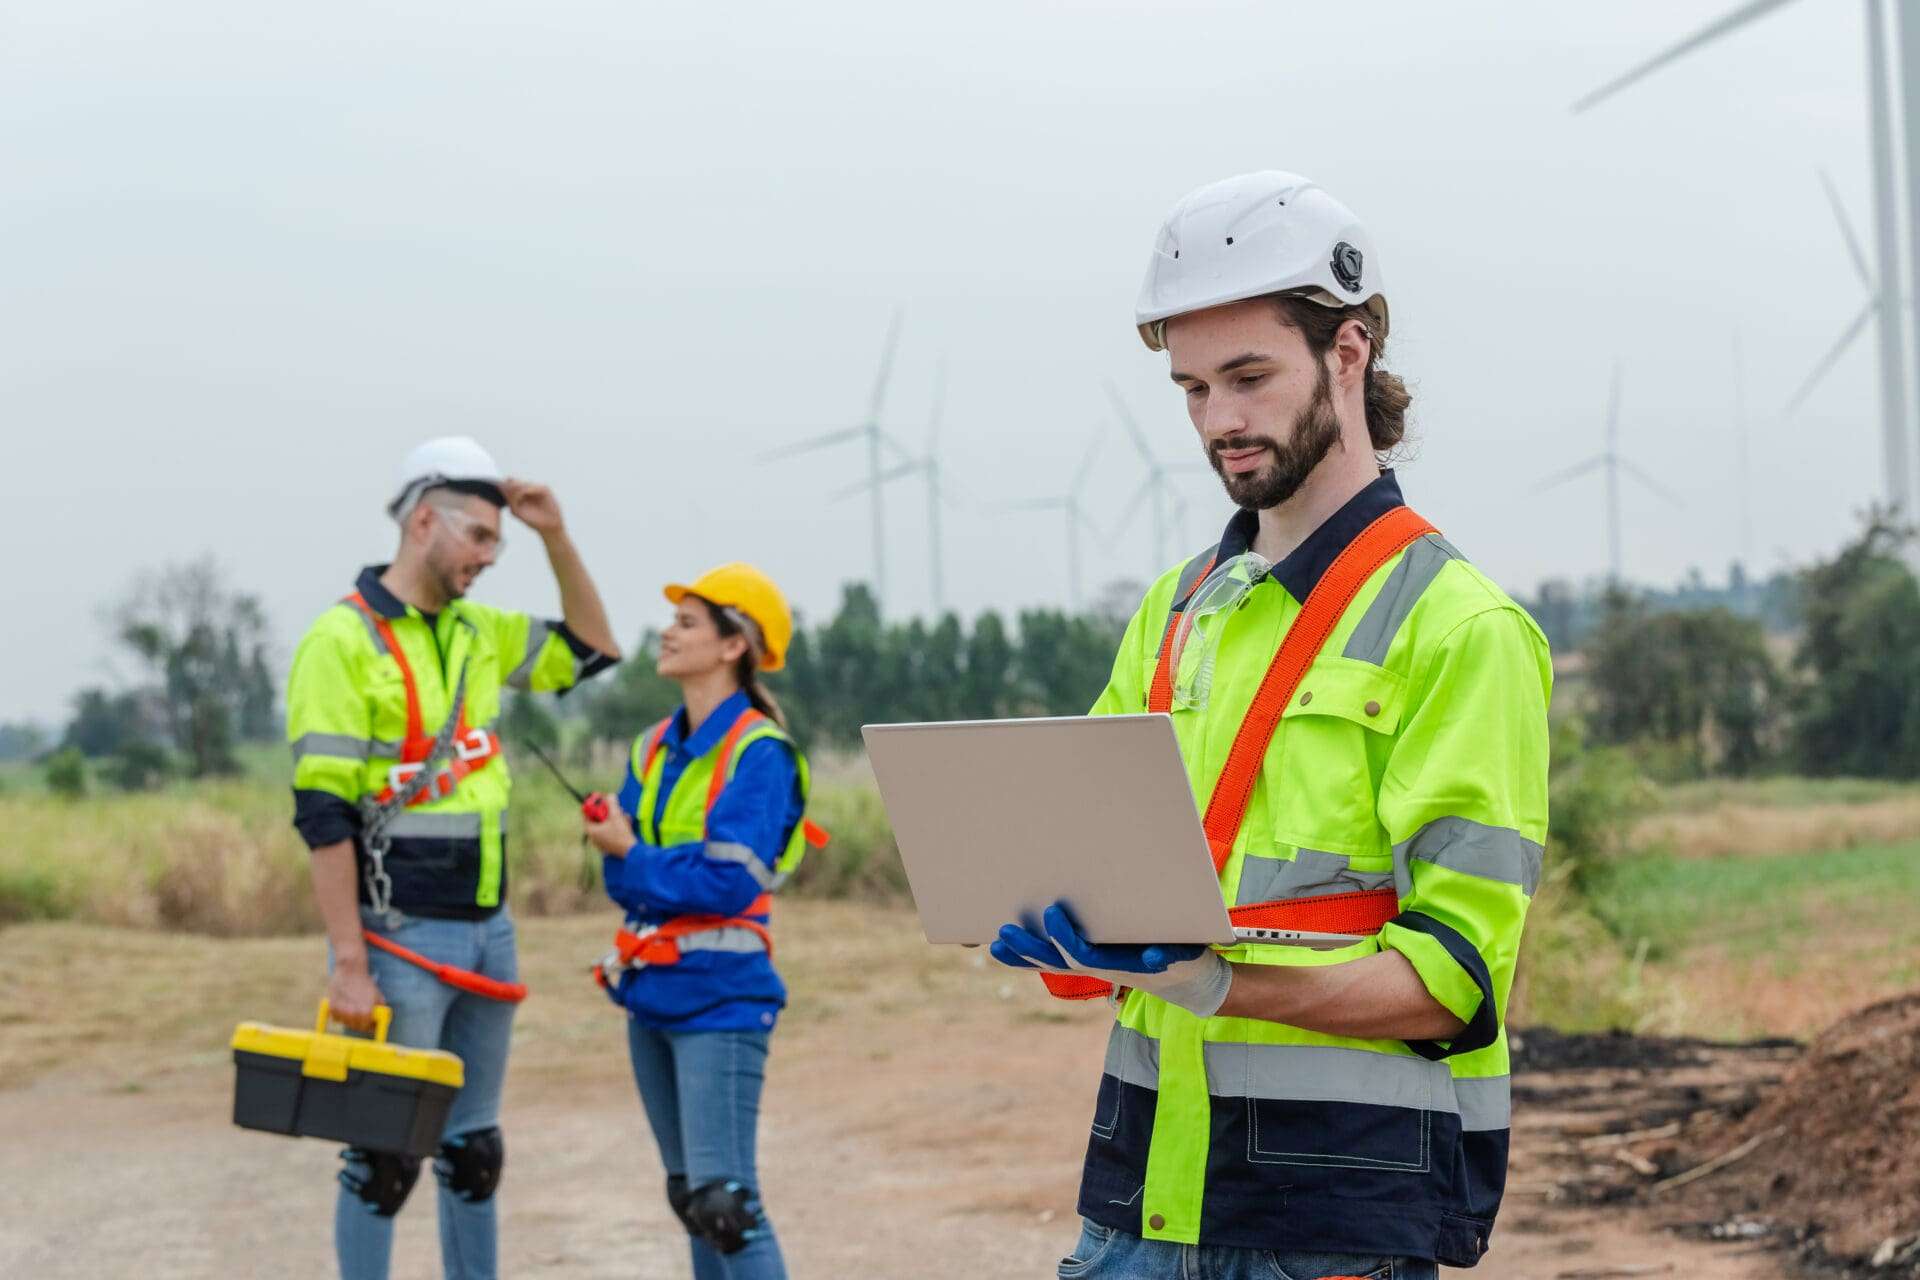 Team engineer using laptop on worksite while two colleagues stand in background.